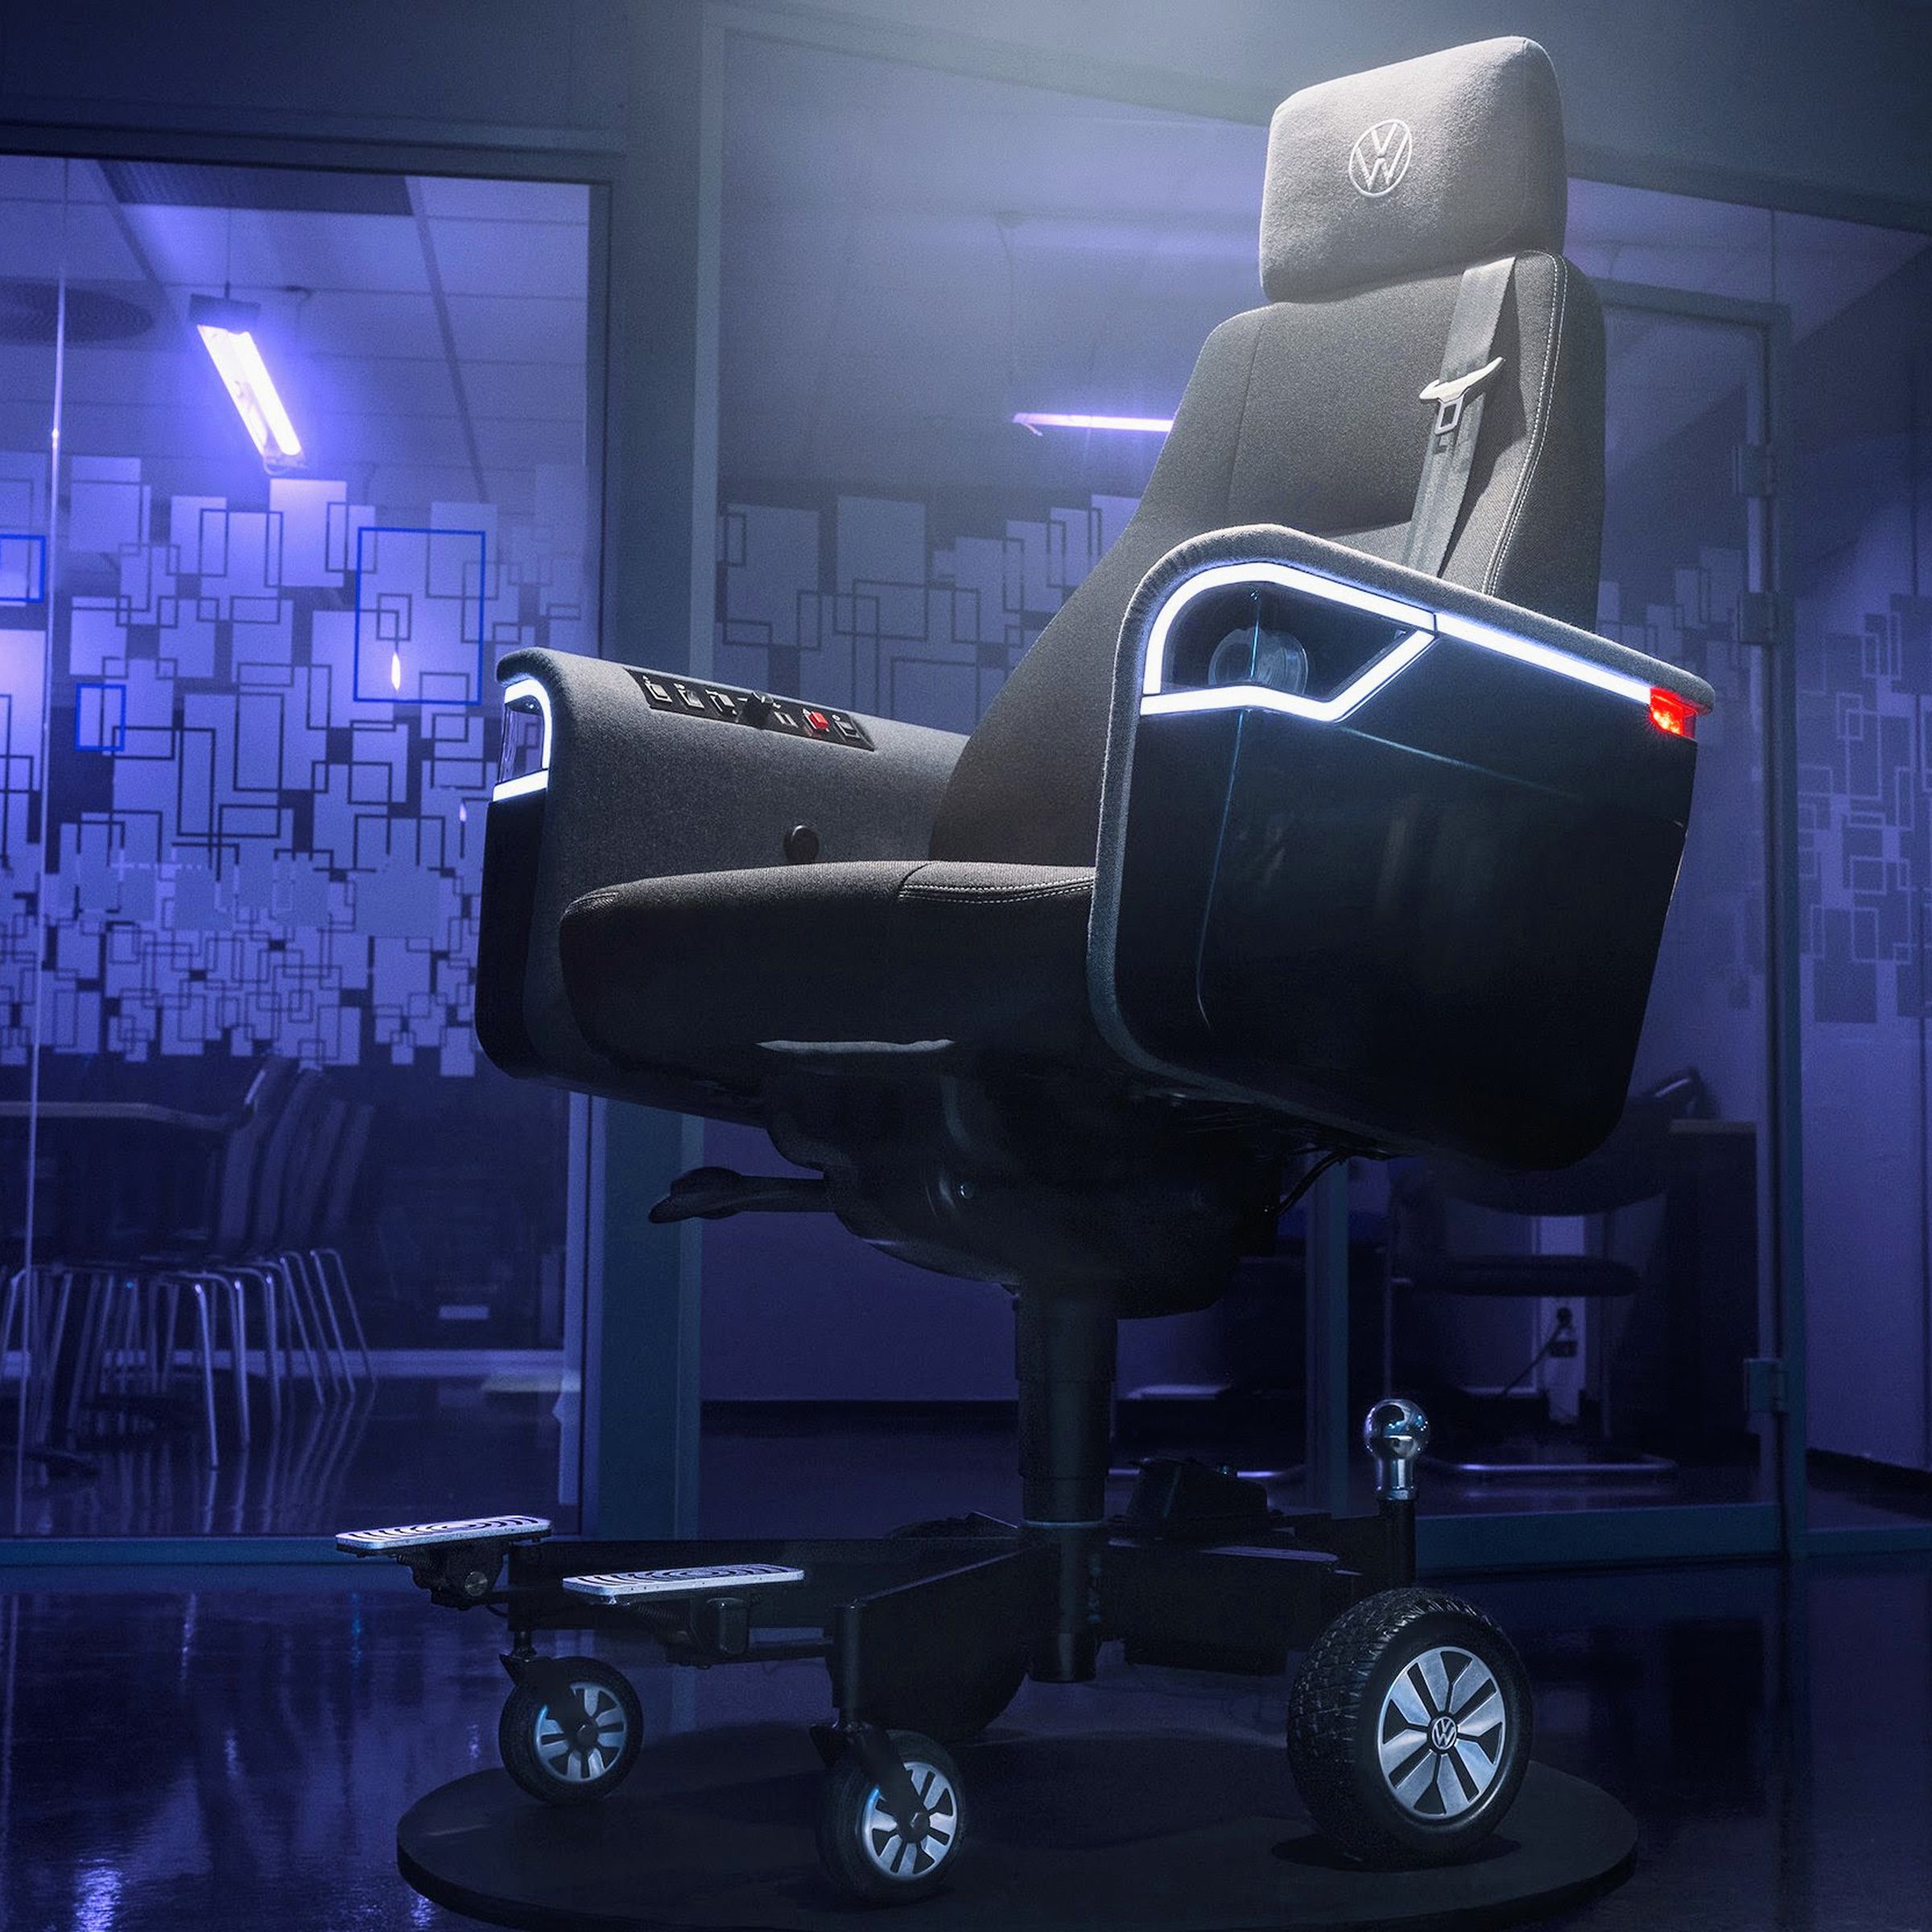 Volkswagen’s chair is ready to party with LED trim around its working headlights, but it’s also ready to drive with a car seatbelt and dedicated metal footrests. The mostly black chair is depicted here in a purple-lit office space with glass doors.